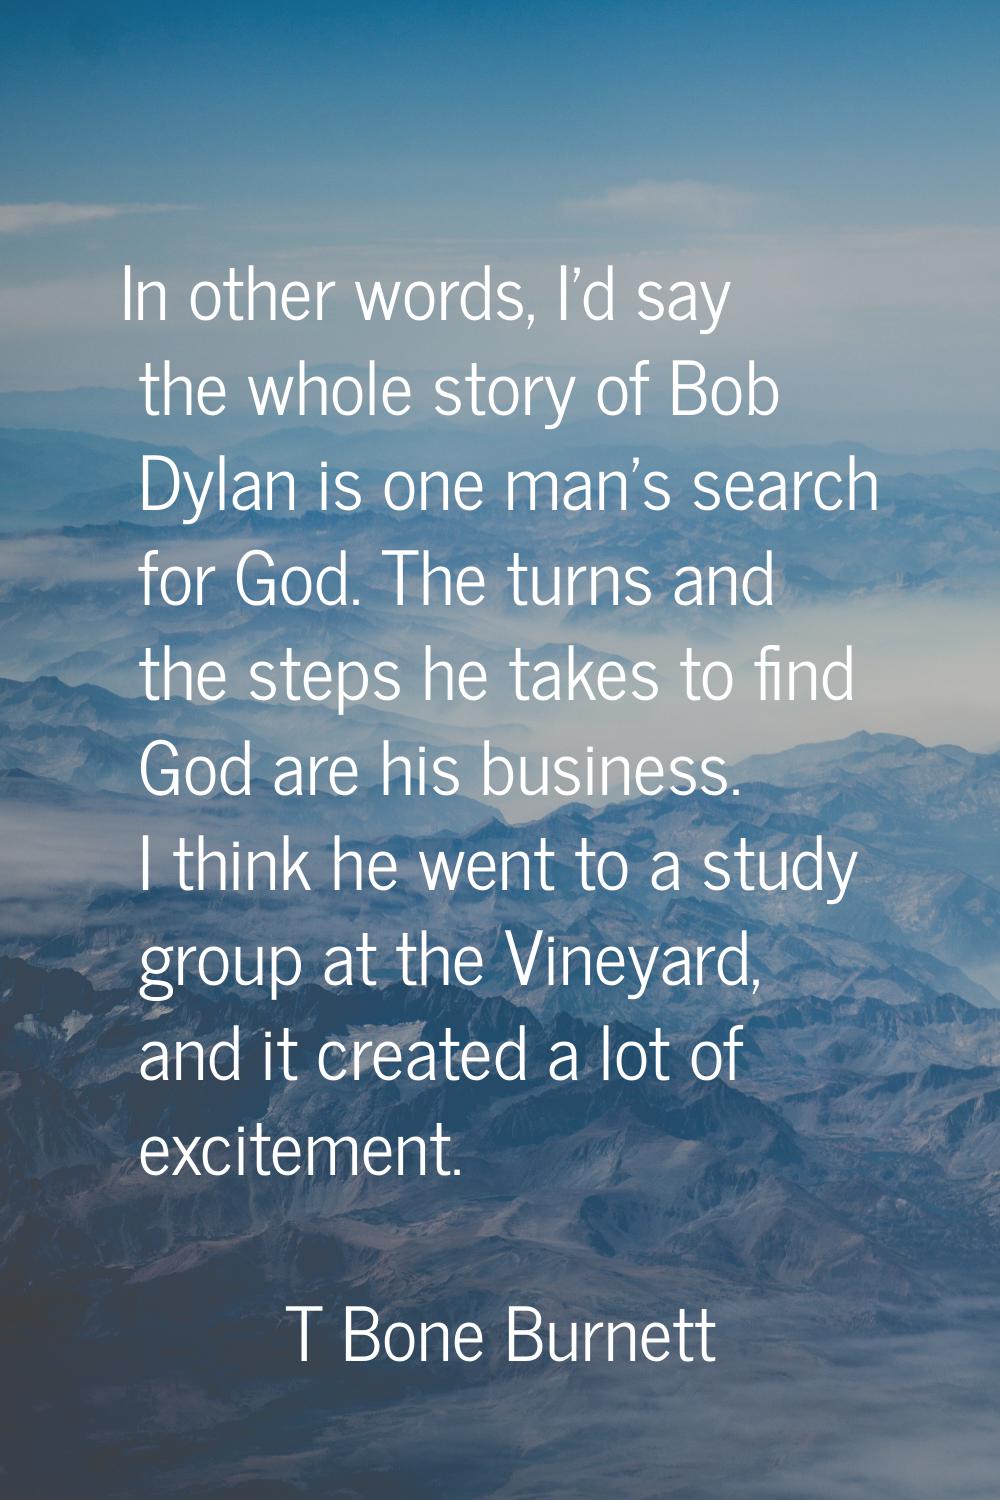 In other words, I'd say the whole story of Bob Dylan is one man's search for God. The turns and the